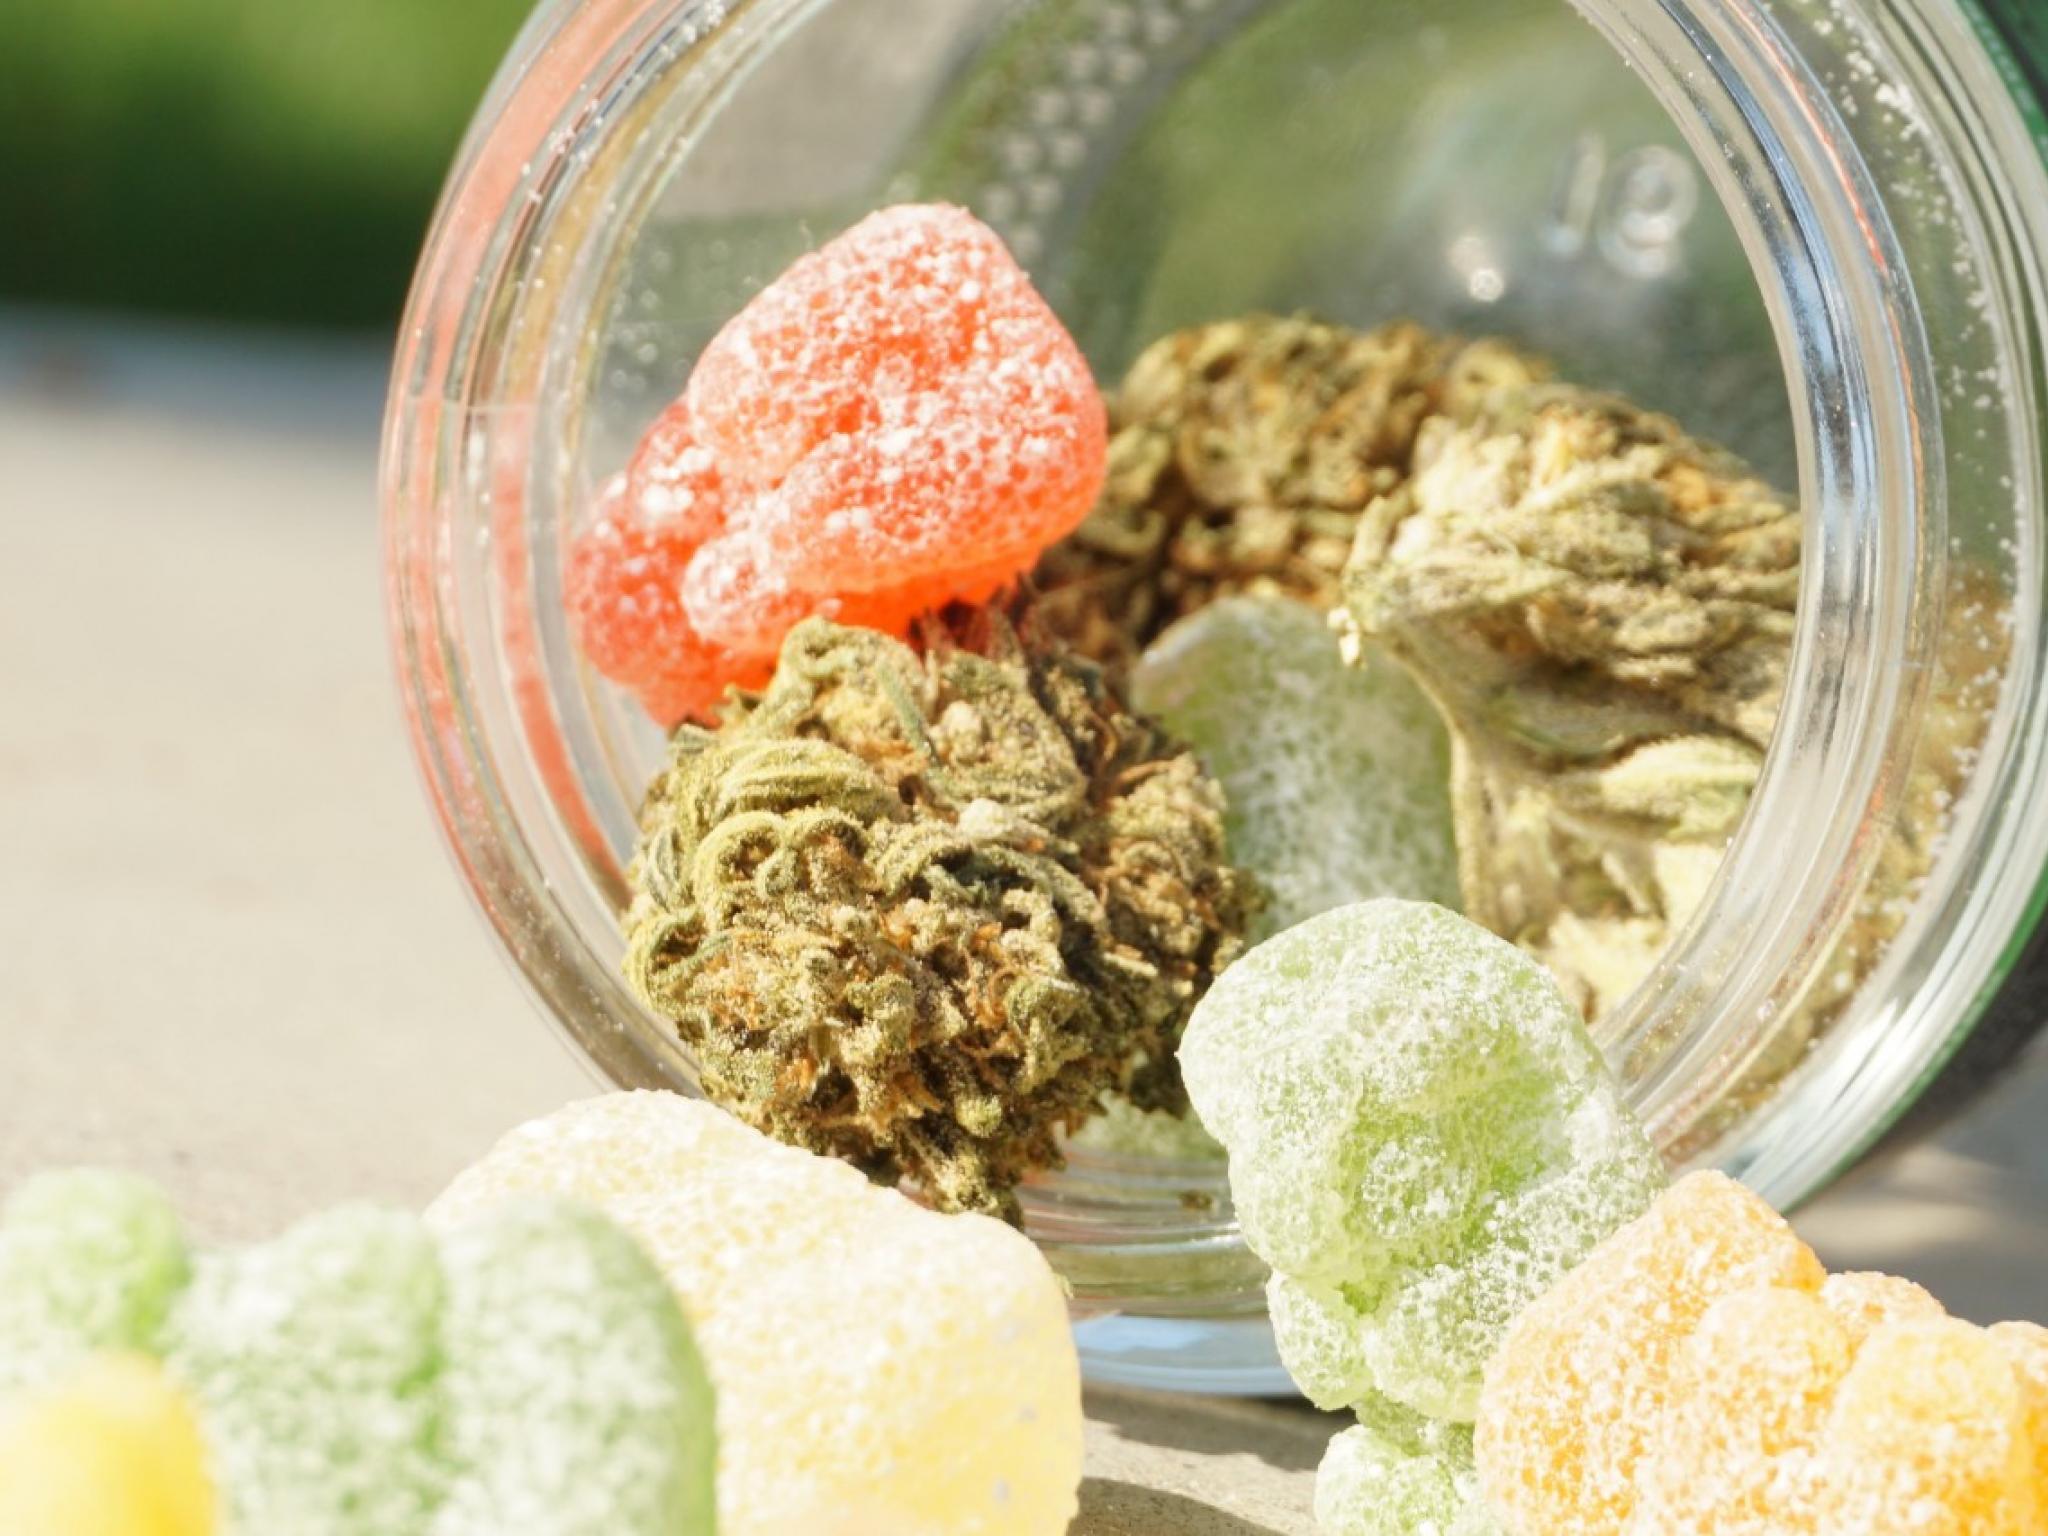  hytn-launches-nano-gummies-offering-faster-and-more-consistent-cannabis-experience 